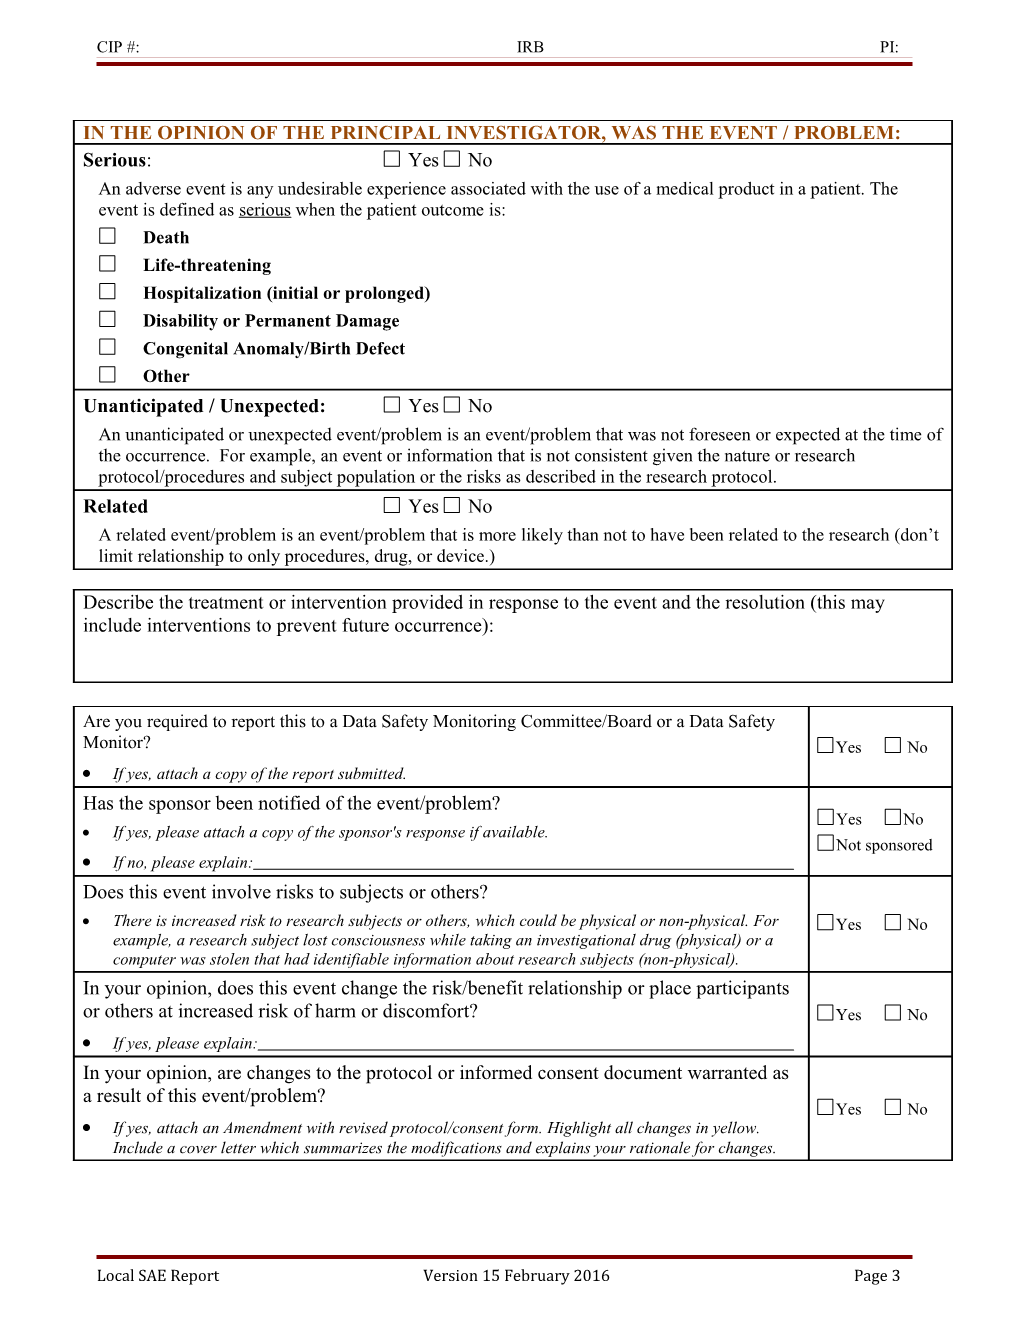 Local Serious Adverse Event Form